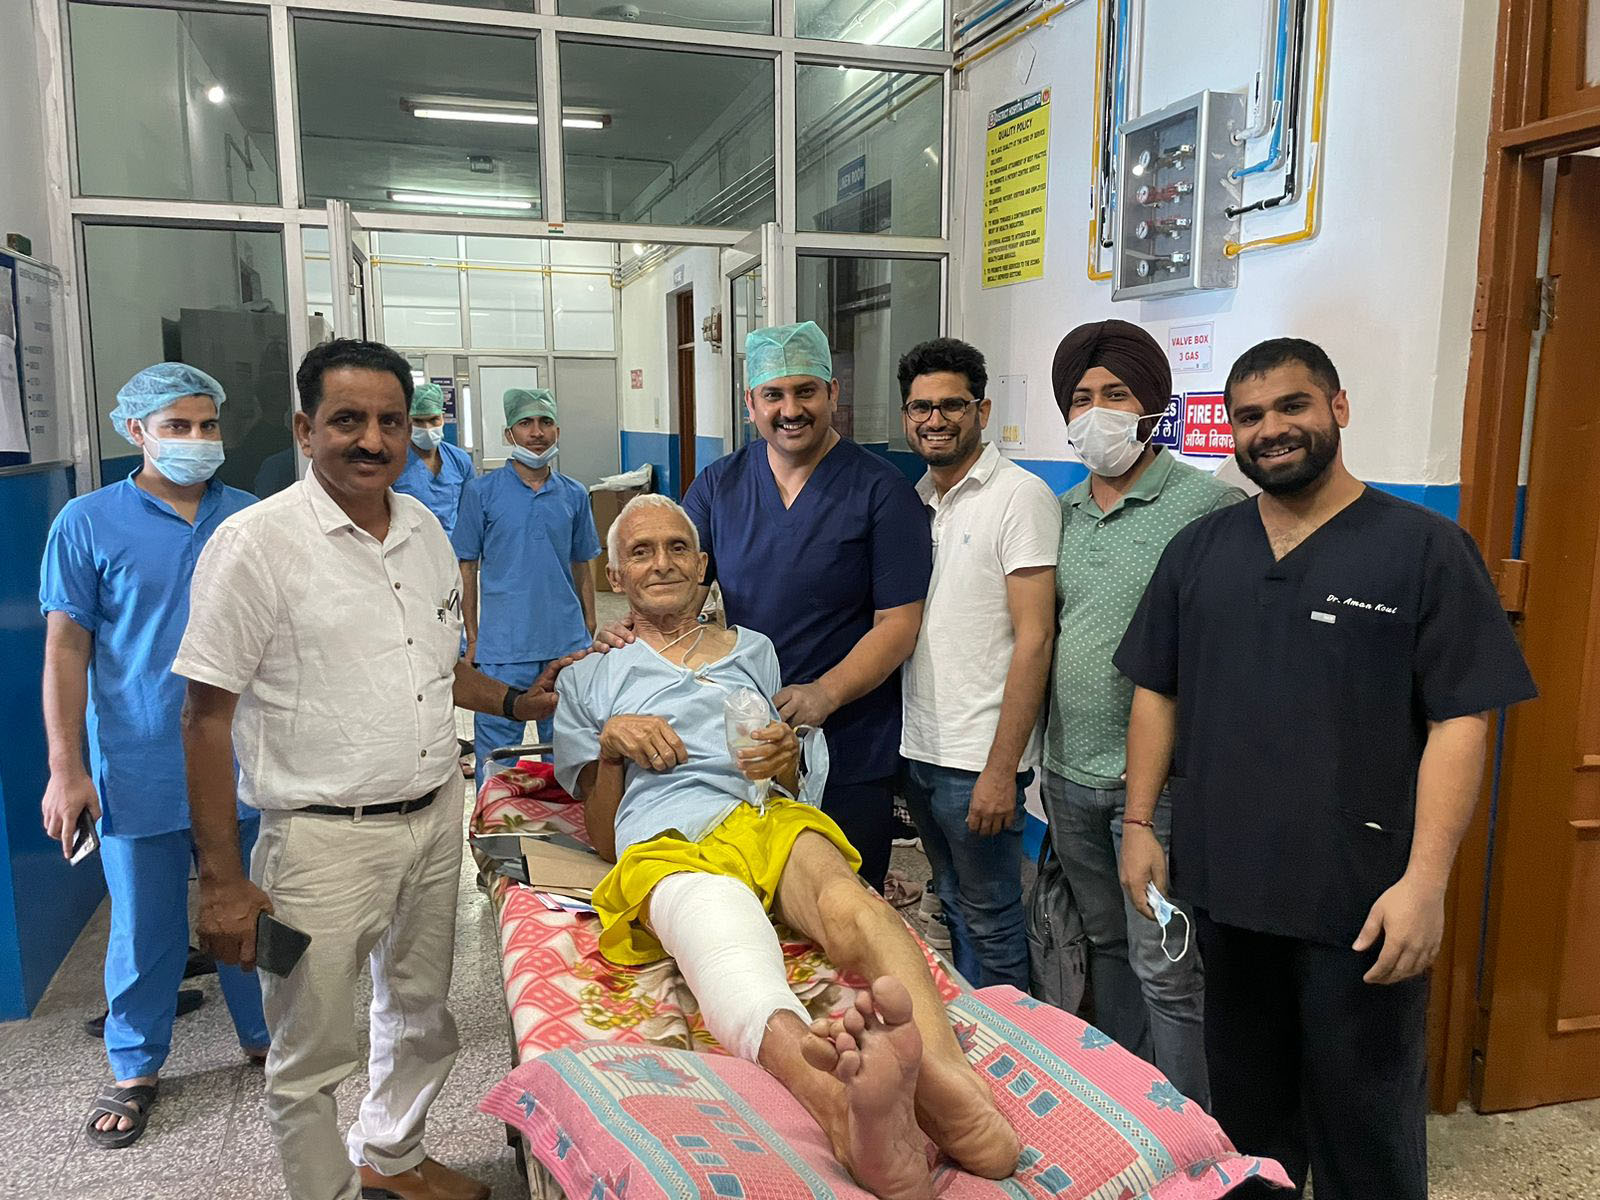 Dr Balvinder Singh and his team of doctors posing with a patient on whom they performed total knee replacement surgery.